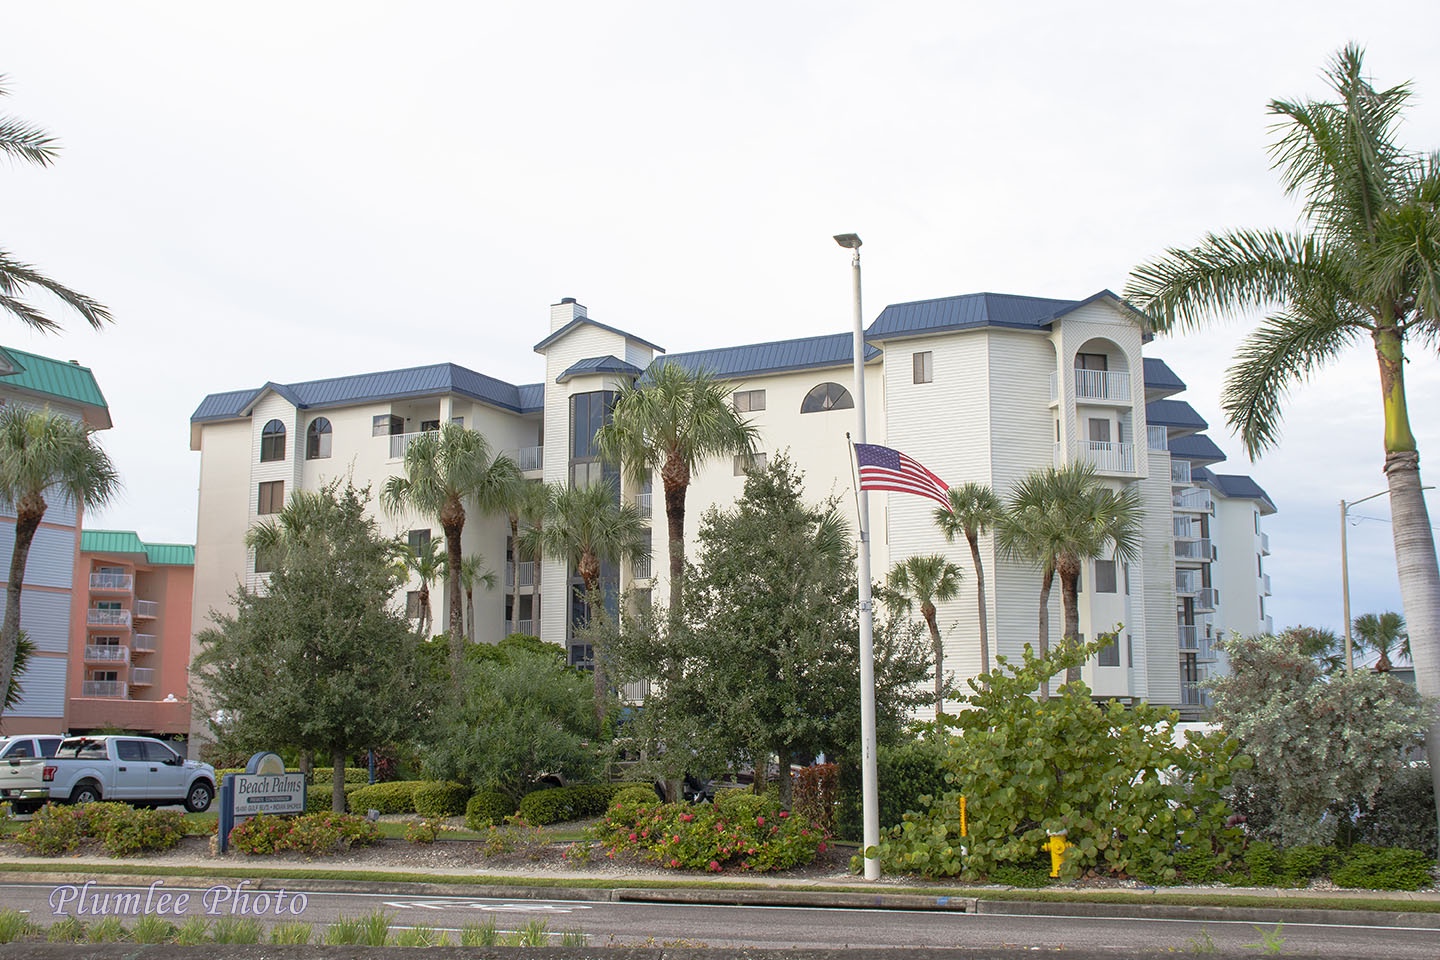 The Beach Palms building located on Gulf Boulevard on Indian Shores.